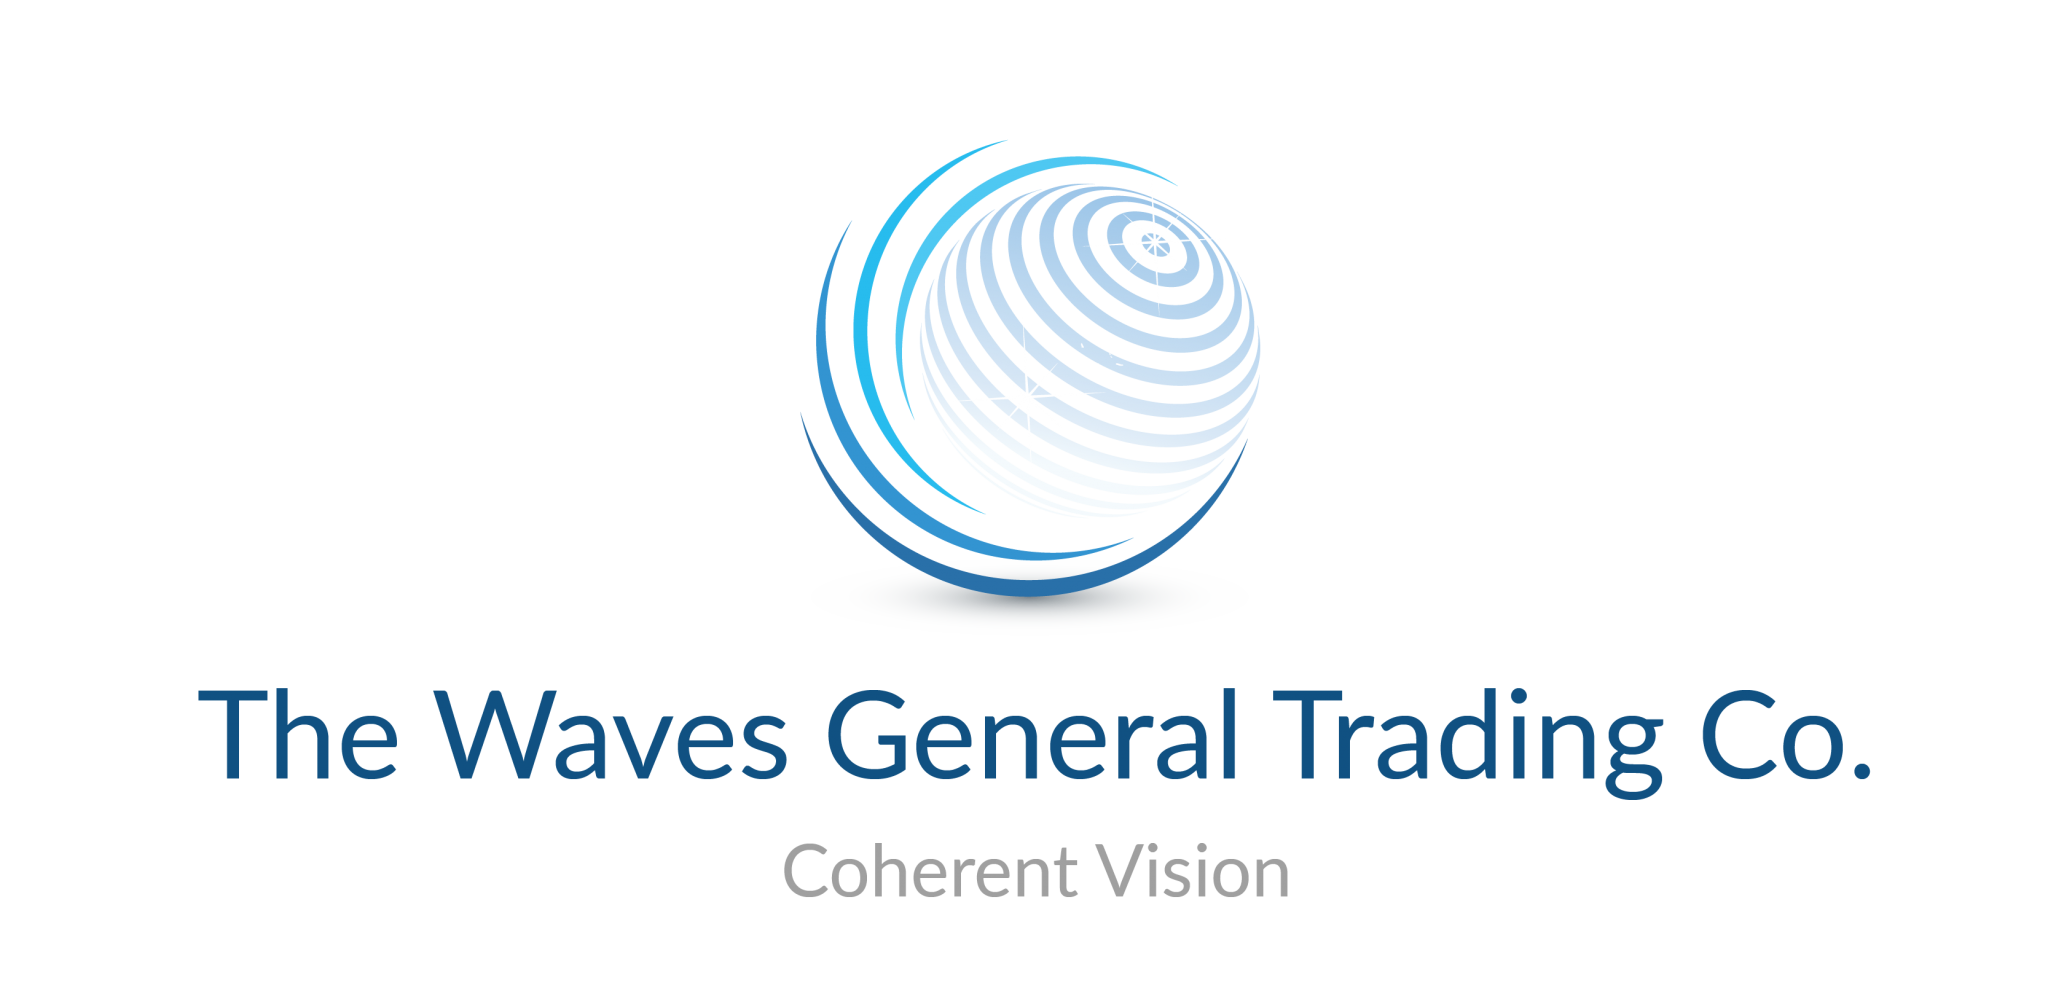 We trade waves course review